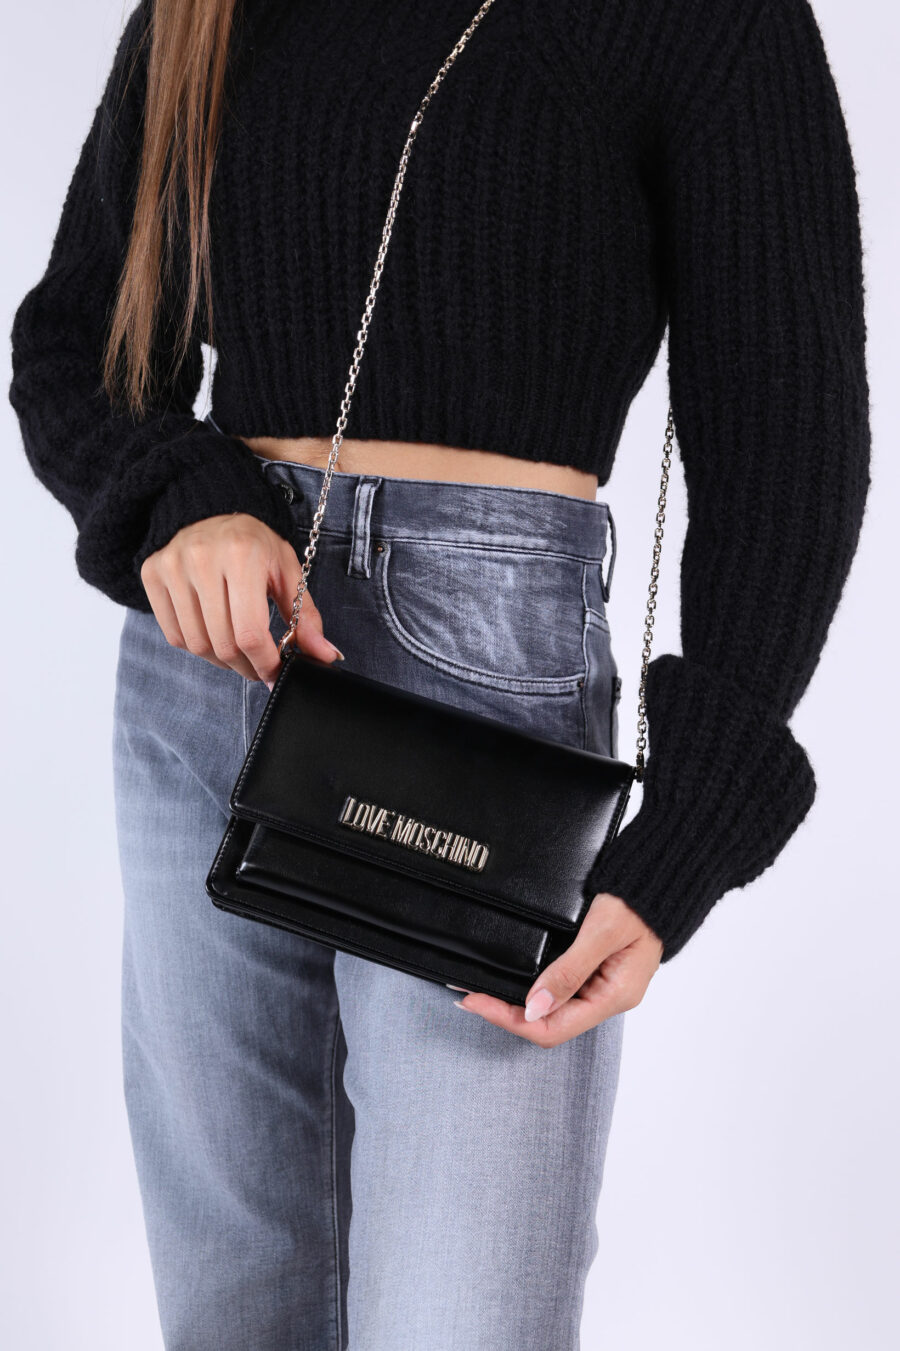 Black shoulder bag with gold lettering mini logo and chain - 361223054662201978